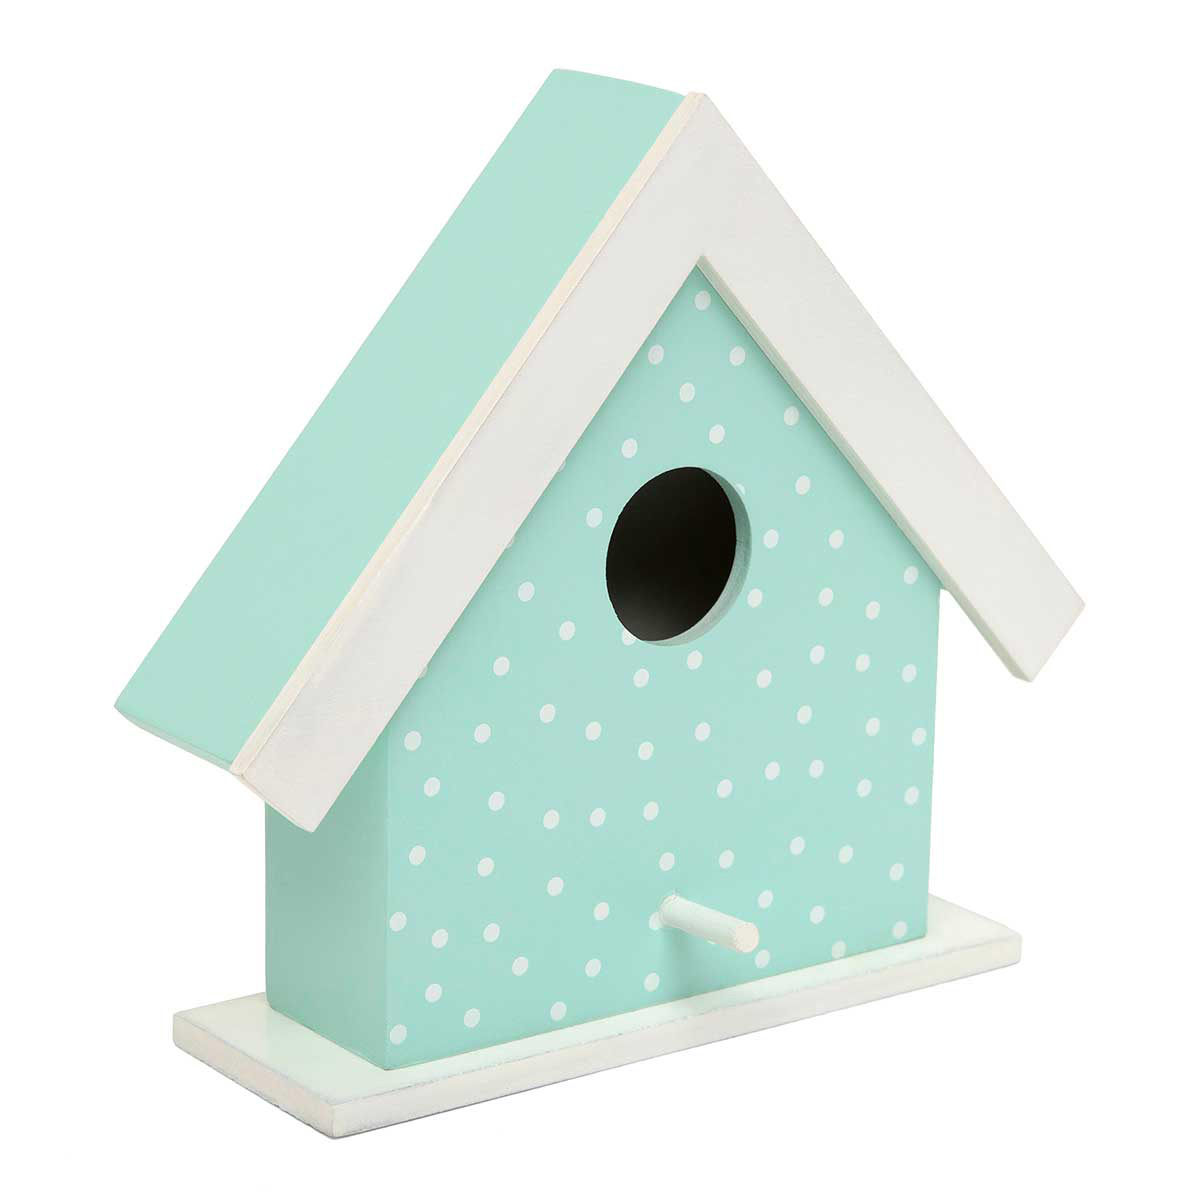 b50 BIRDHOUSE BLUE MEADOW PINDOT 6.75IN X 2.75IN X 6.25IN WOOD - Click Image to Close